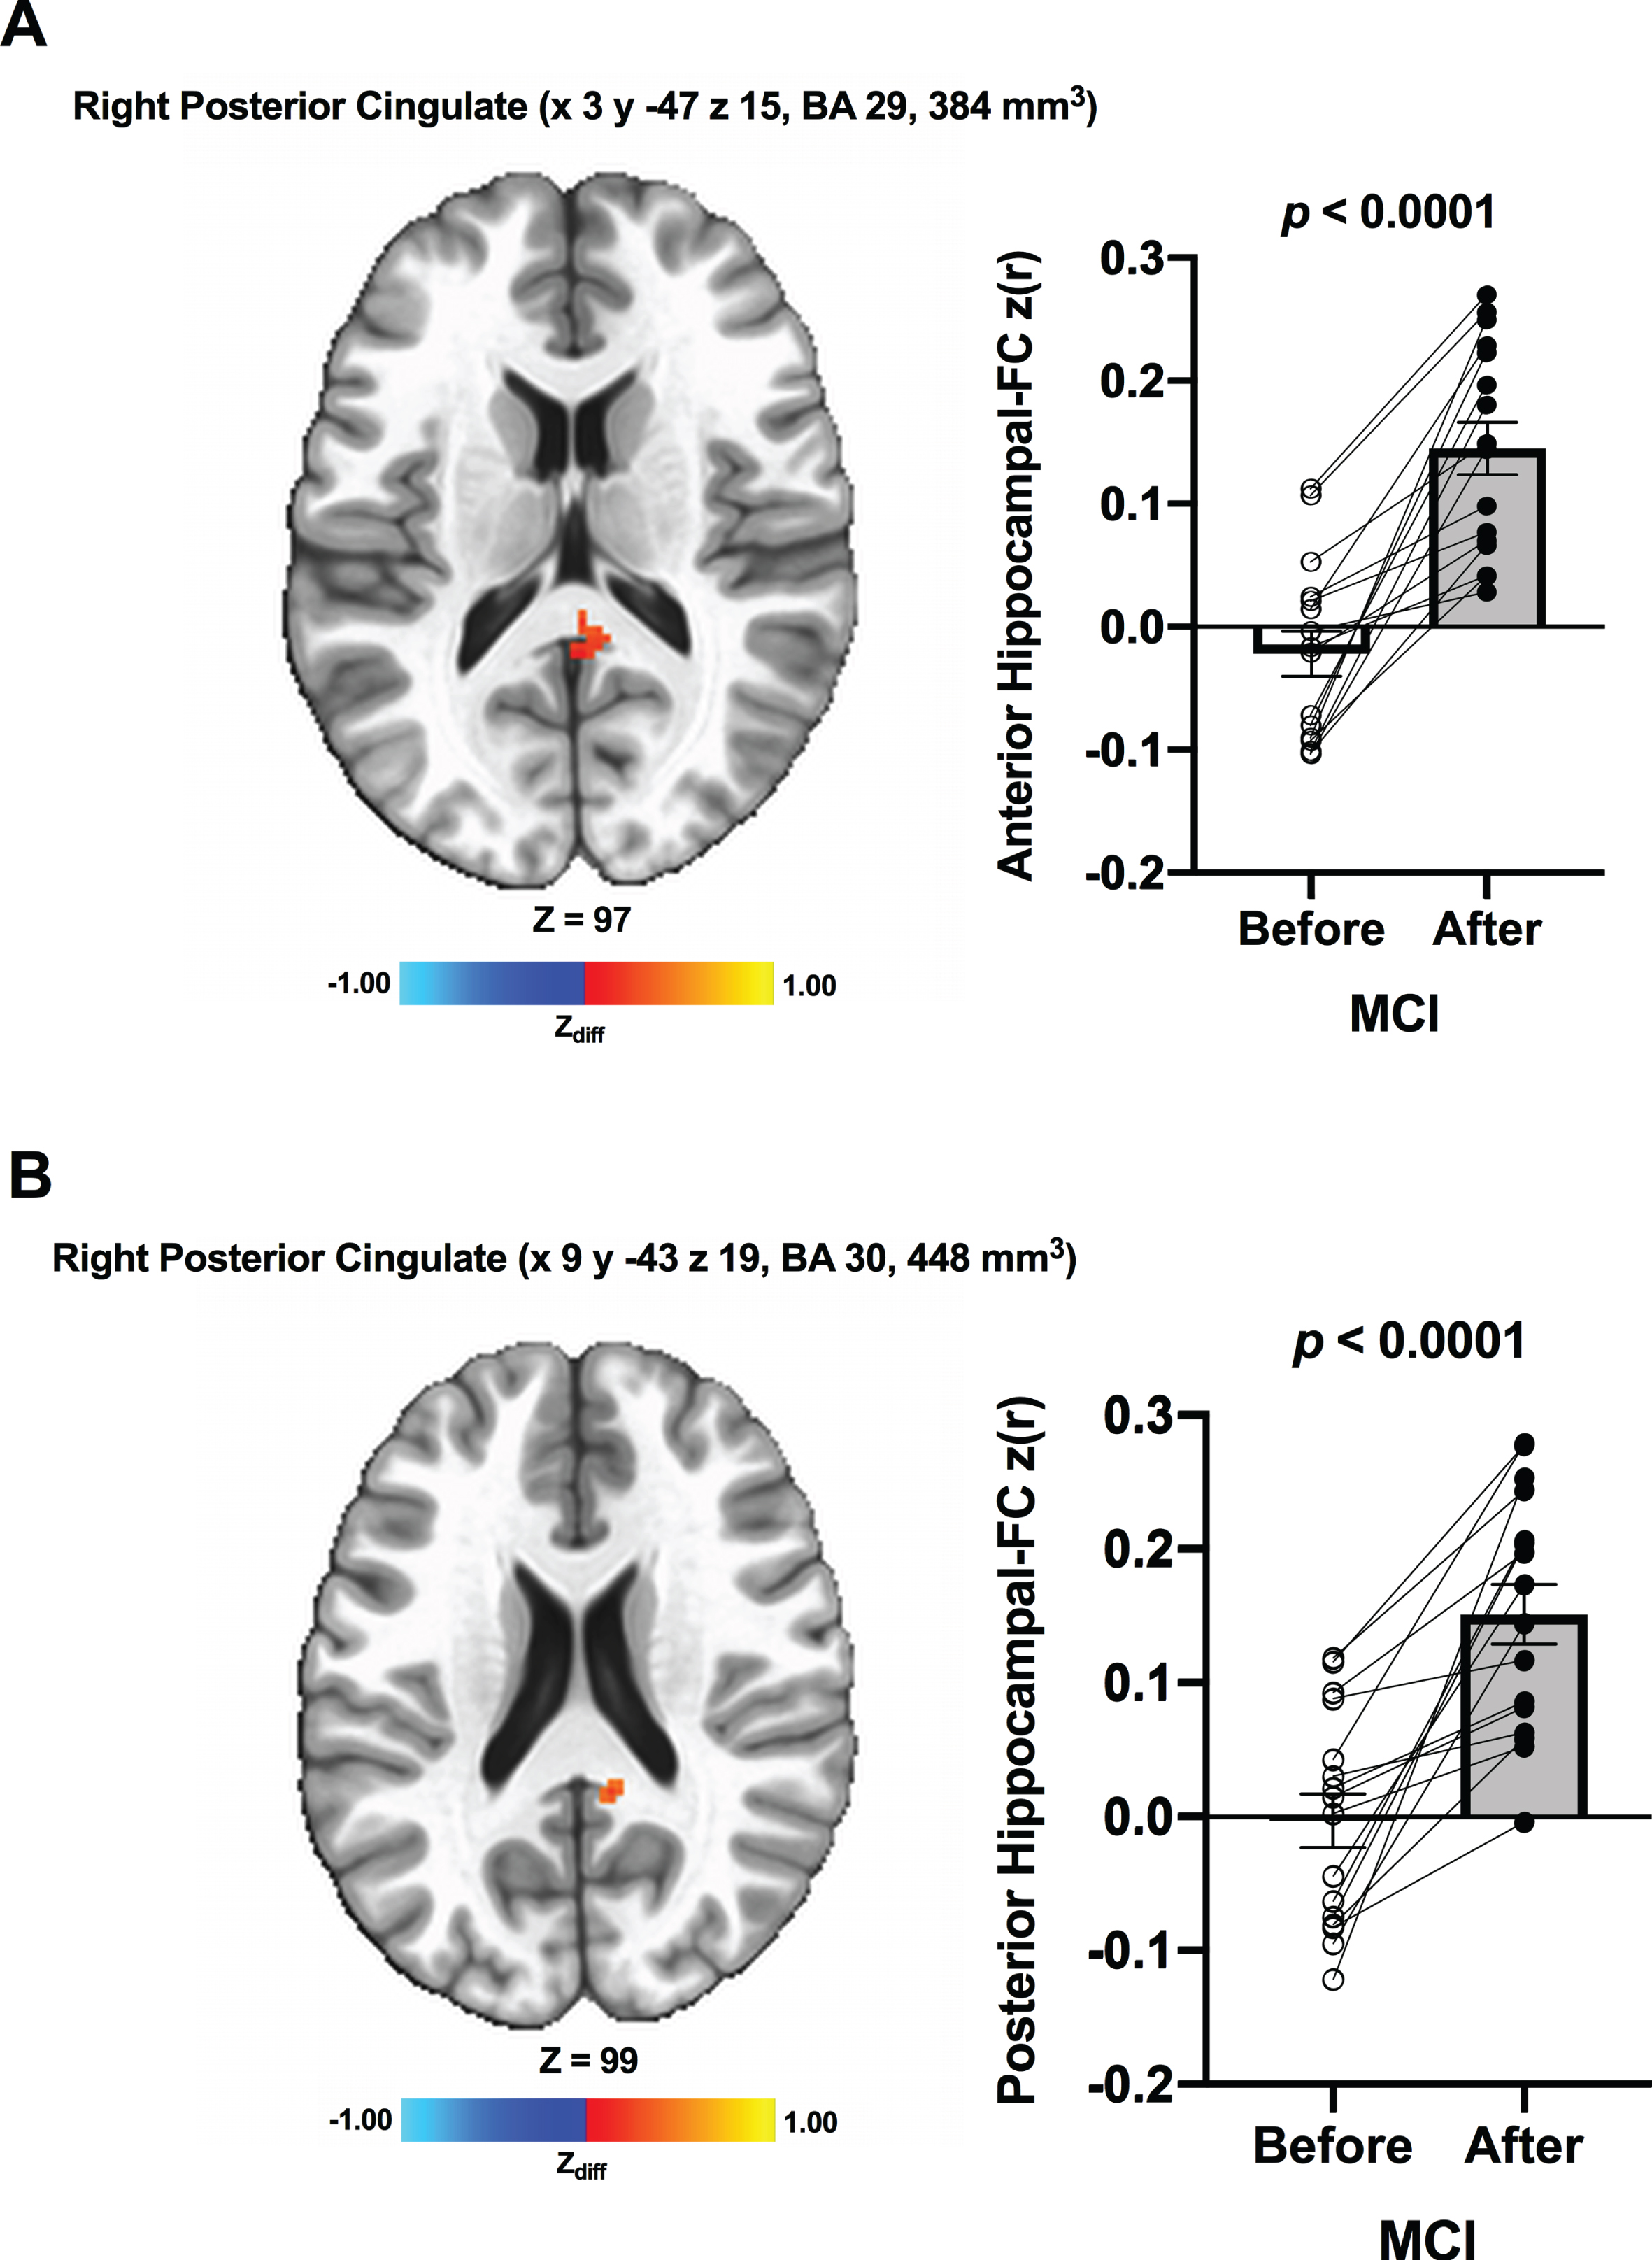 Increased functional connectivity between (A) the anterior hippocampal seed and (B) the posterior hippocampal seed and region within the right posterior cingulate, respectively, were found from before to after ET in individuals with MCI. Adjacent bar graphs indicate the connectivity between each hippocampal seed and right posterior cingulate (±SEM) for before and after ET. p-values above bar graphs indicate statistical difference from before to after ET.